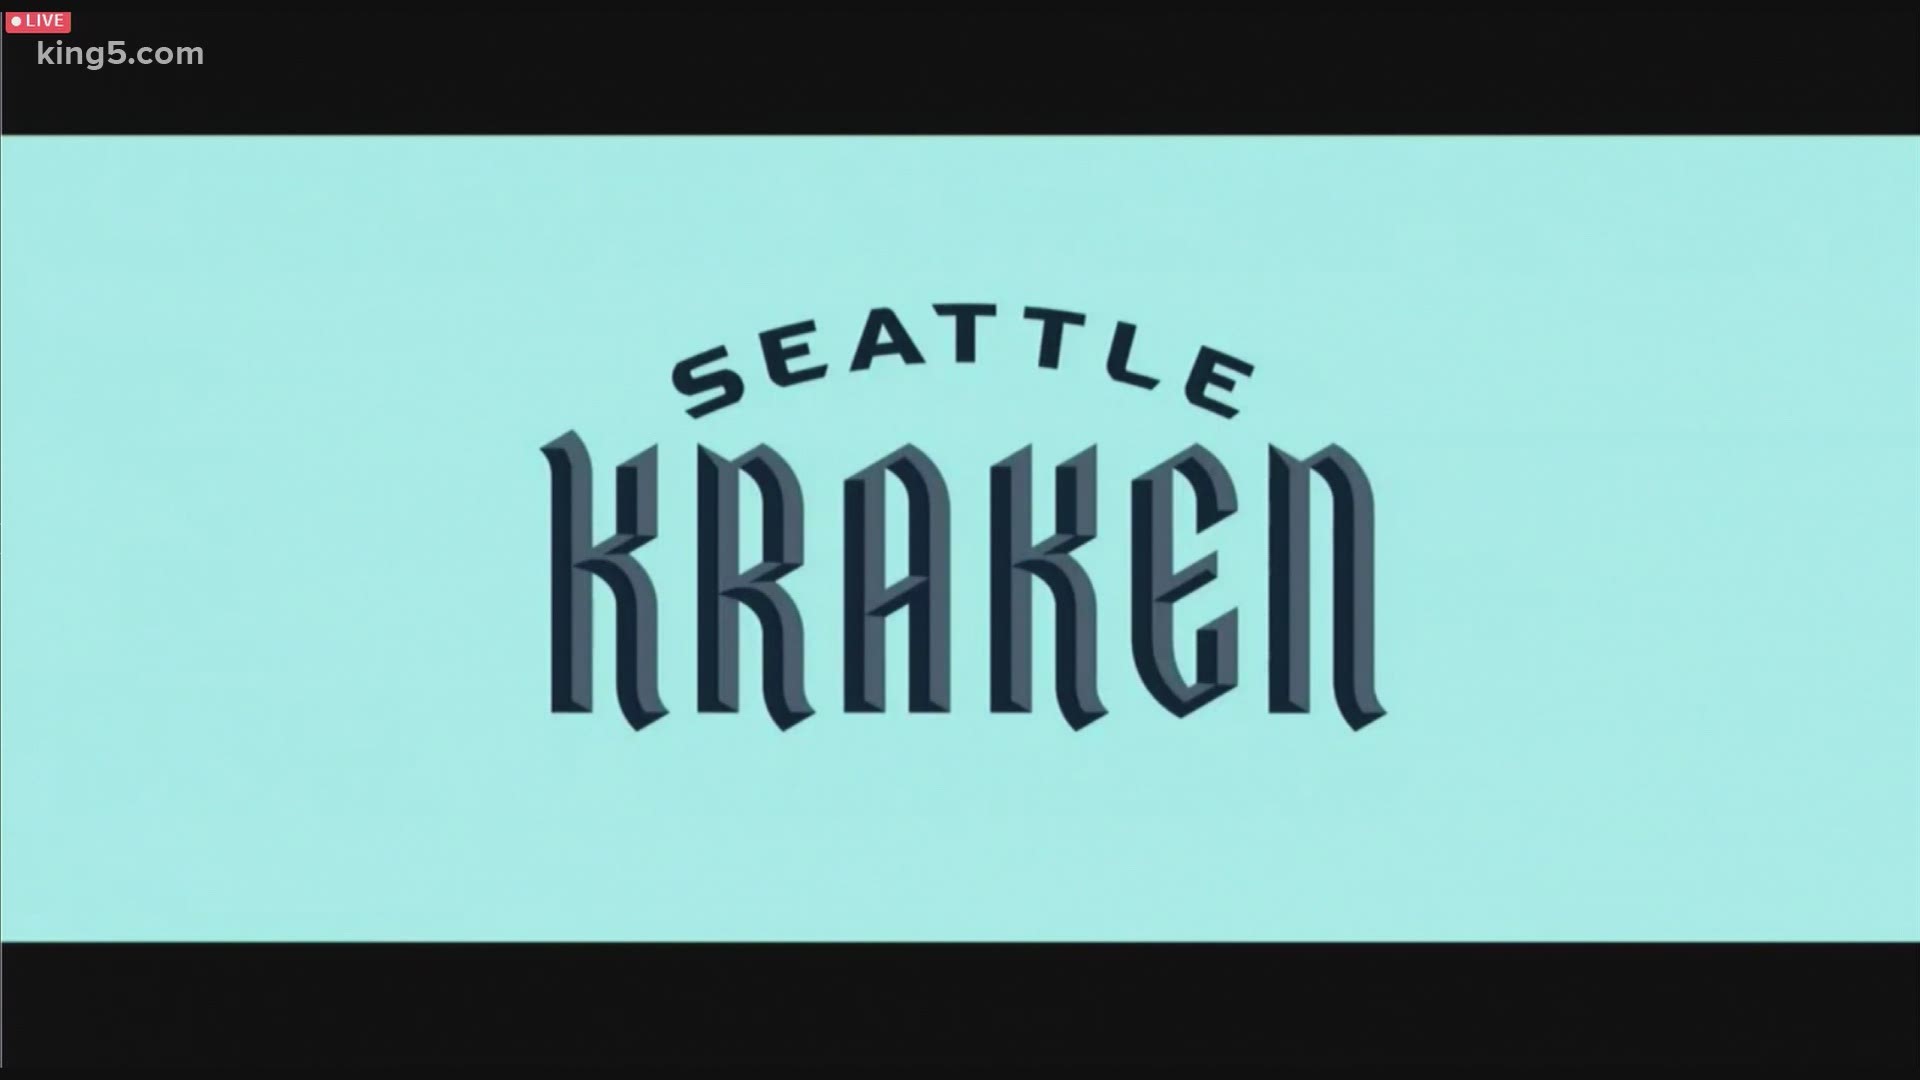 NHL Seattle announced the name of the 32nd NHL franchise will be the Seattle Kraken.